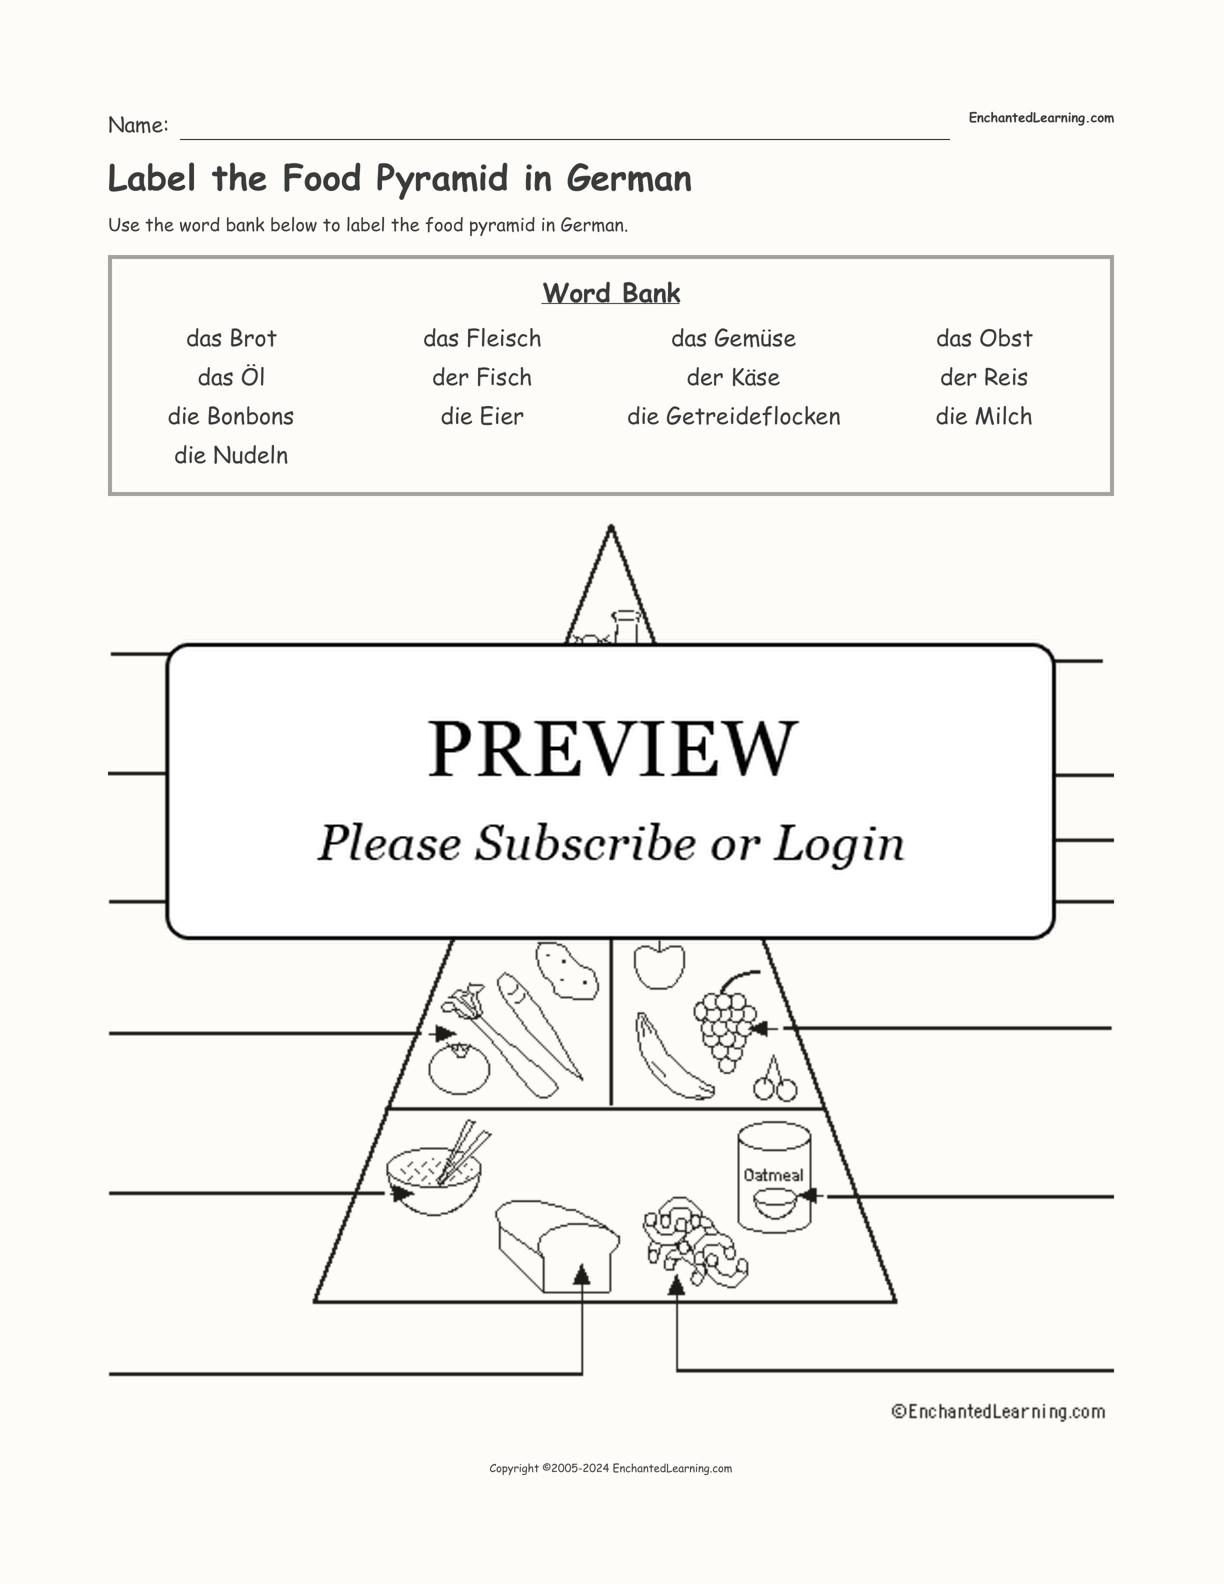 Label the Food Pyramid in German interactive worksheet page 1